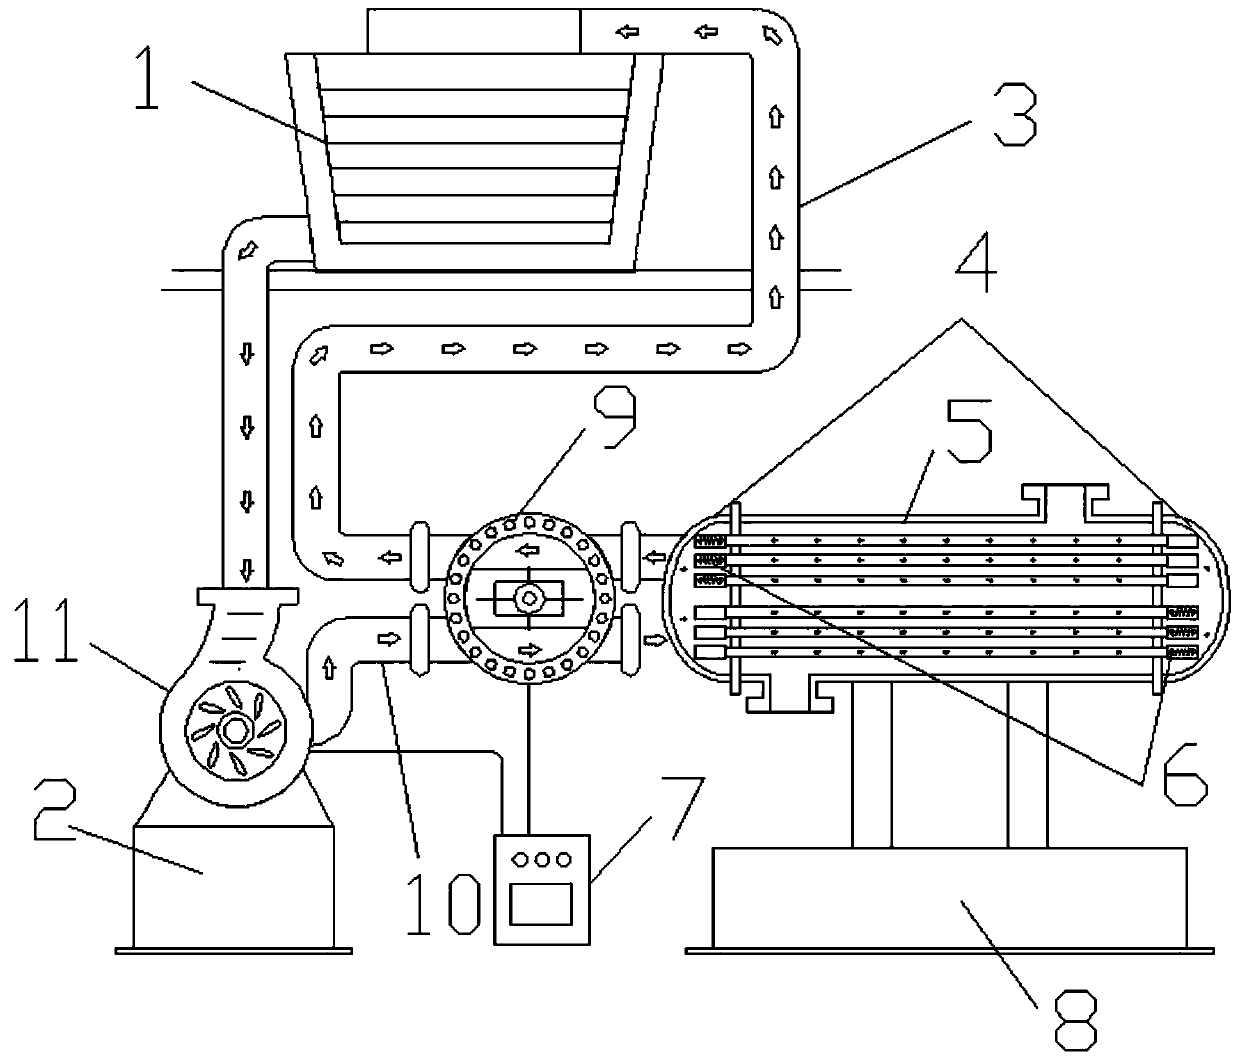 Brush-type online cleaning system device